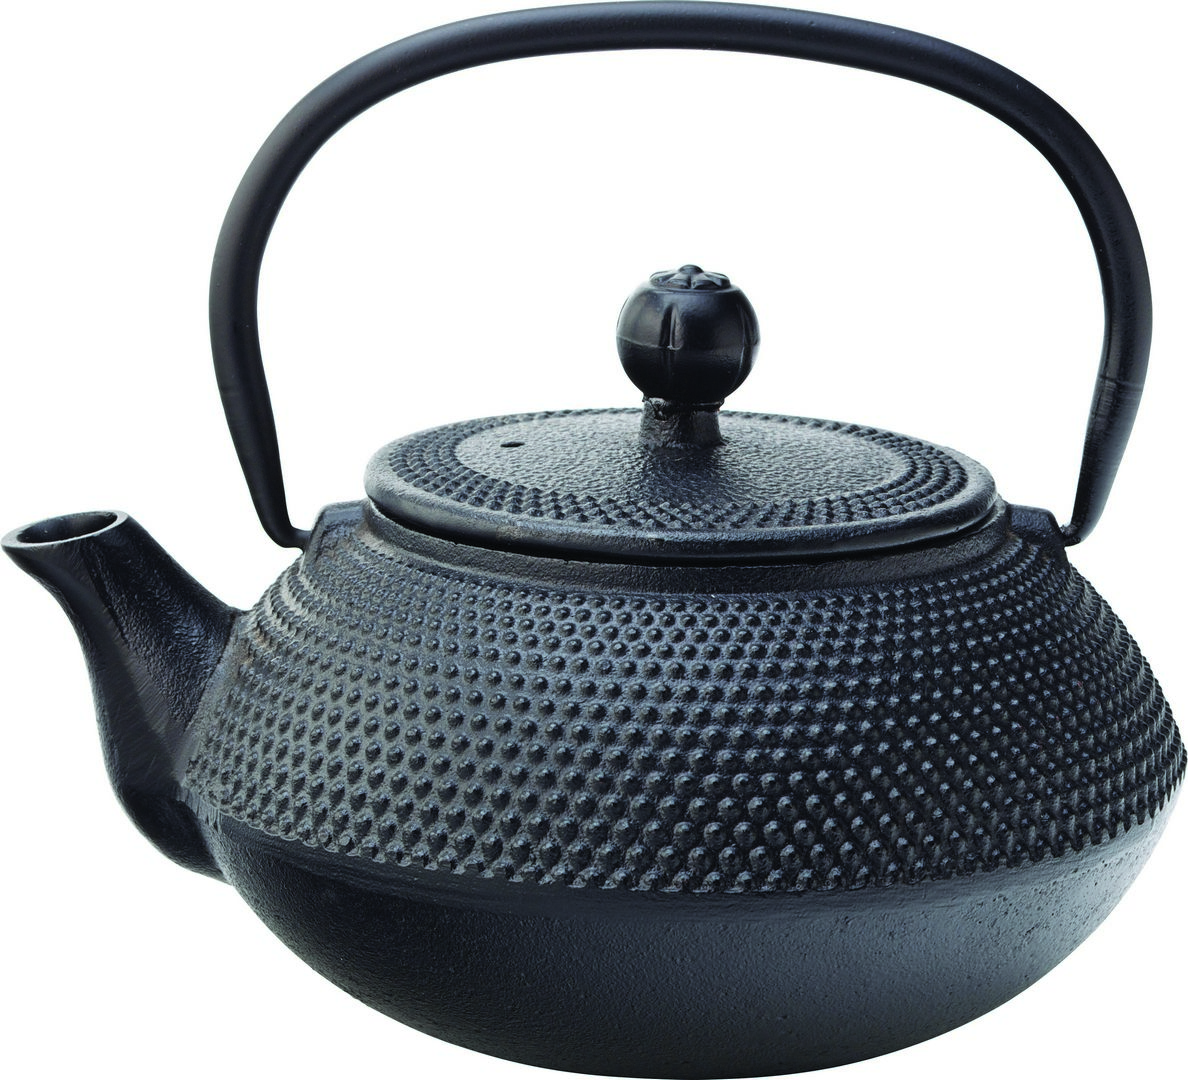 Mandarin Teapot Black 24oz (67cl) - with Infuser - MH7007-000000-B01006 (Pack of 6)